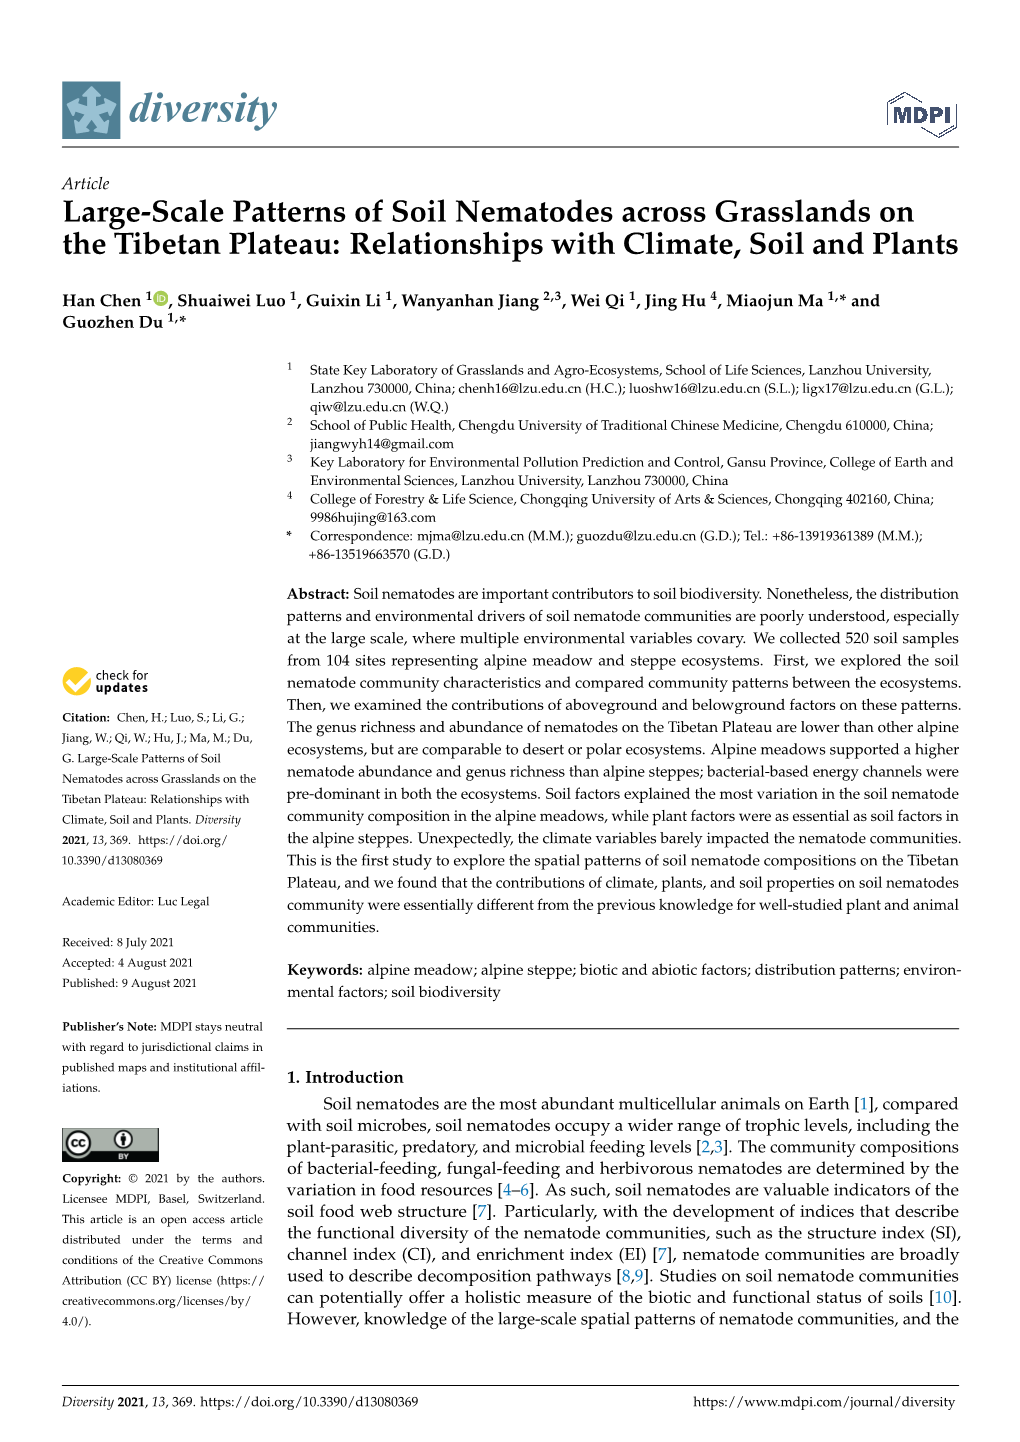 Large-Scale Patterns of Soil Nematodes Across Grasslands on the Tibetan Plateau: Relationships with Climate, Soil and Plants